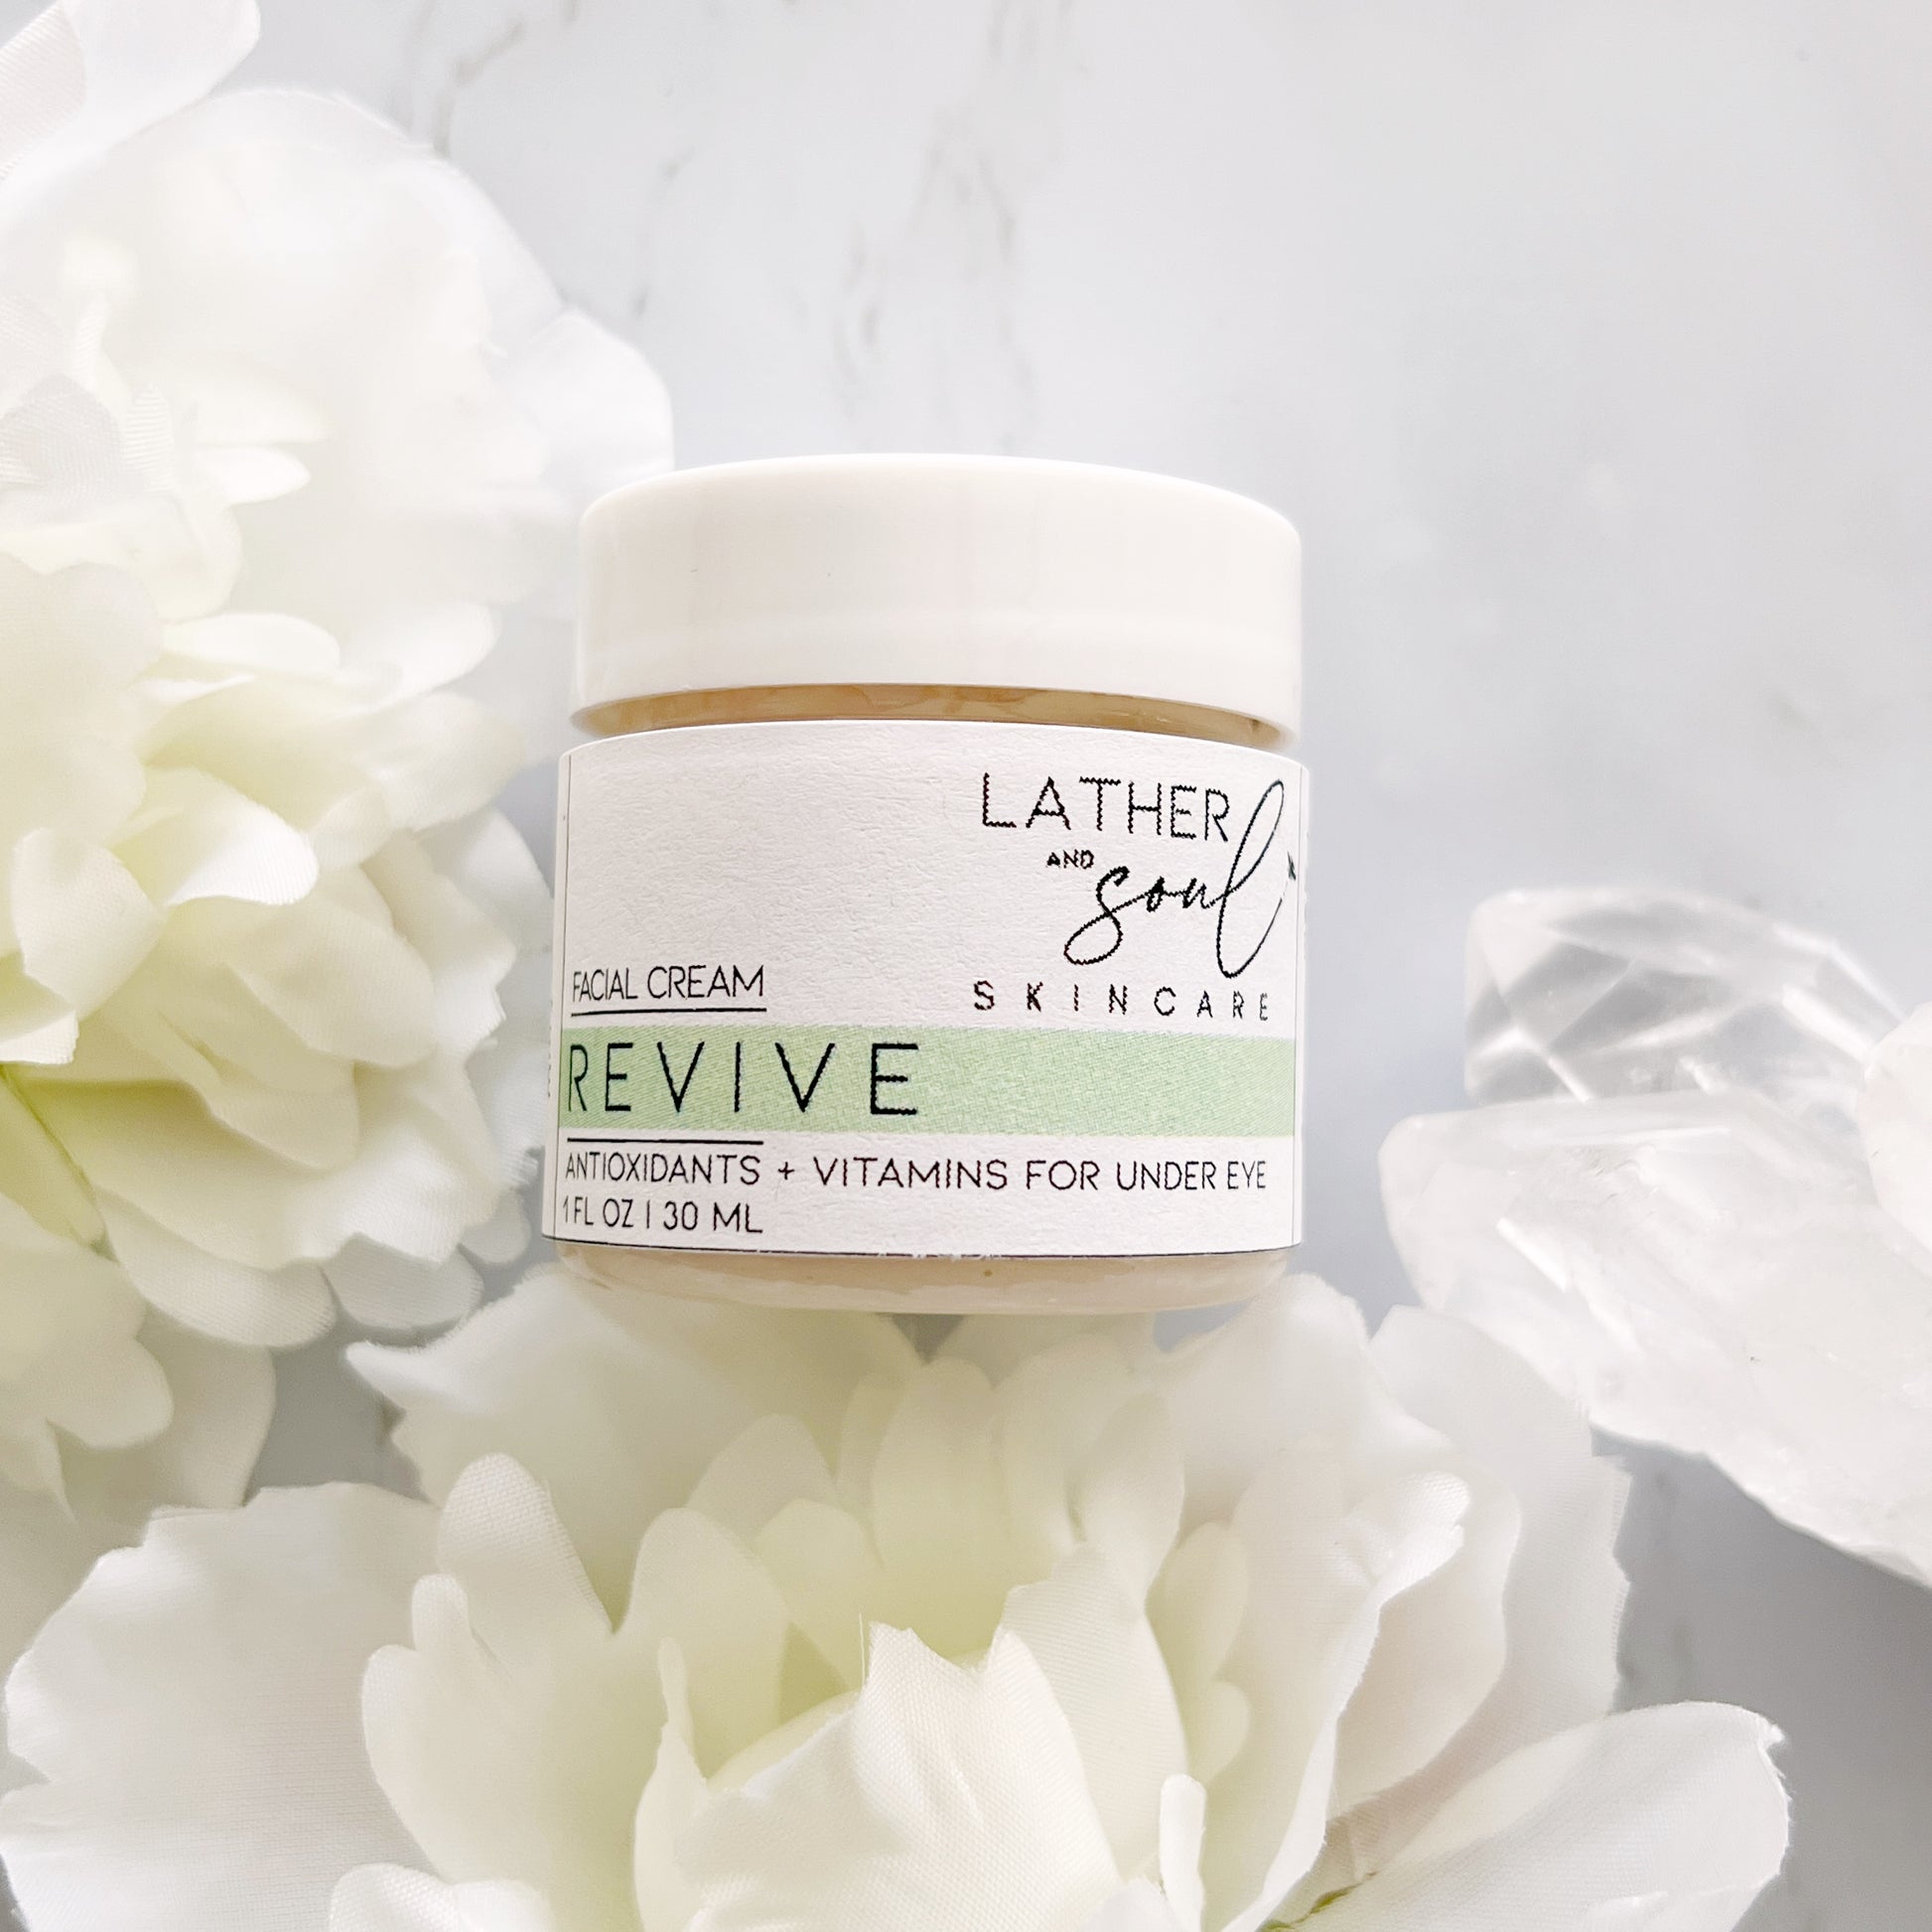 "Revive" under eye cream for puffiness, darkness, and under eye bags